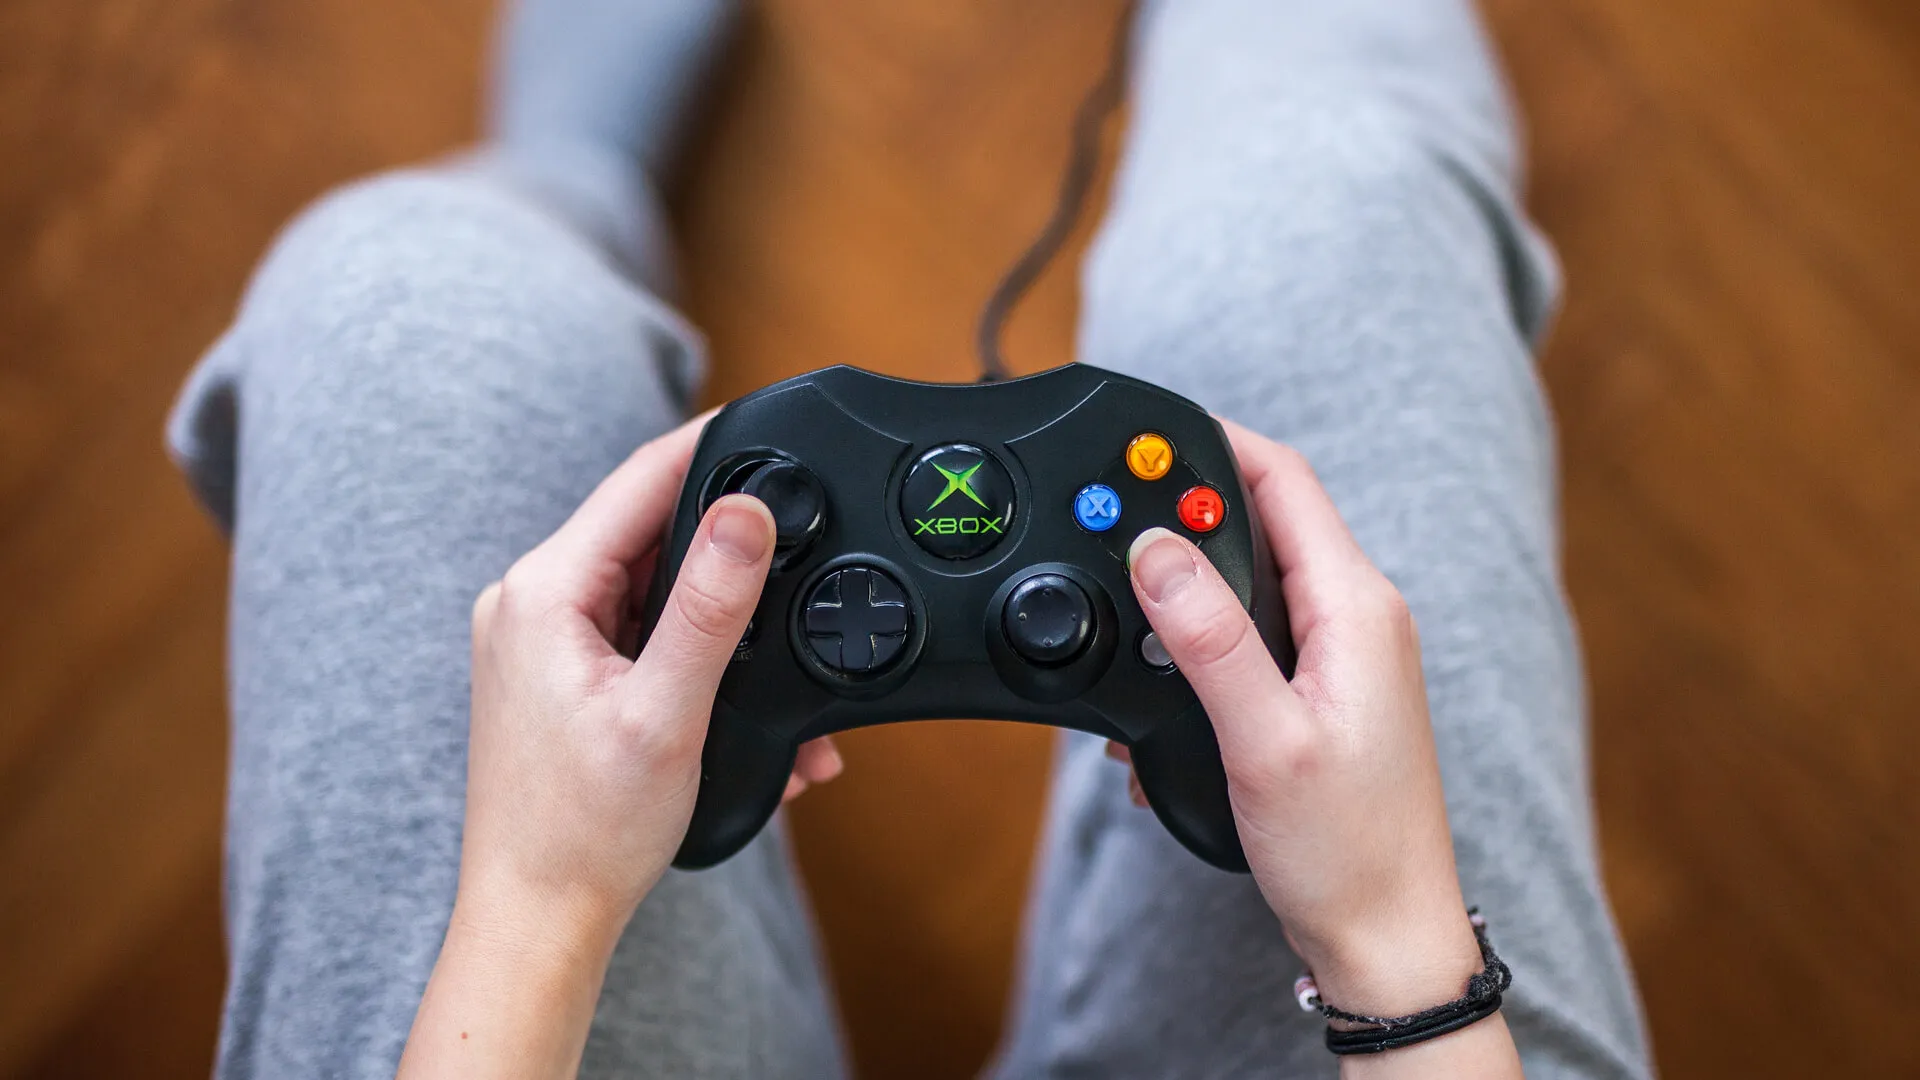 Gothenburg, Sweden - January 24, 2015: A shot from above of a young womans hands holding a game controller for the Microsoft Xbox, a video game console.